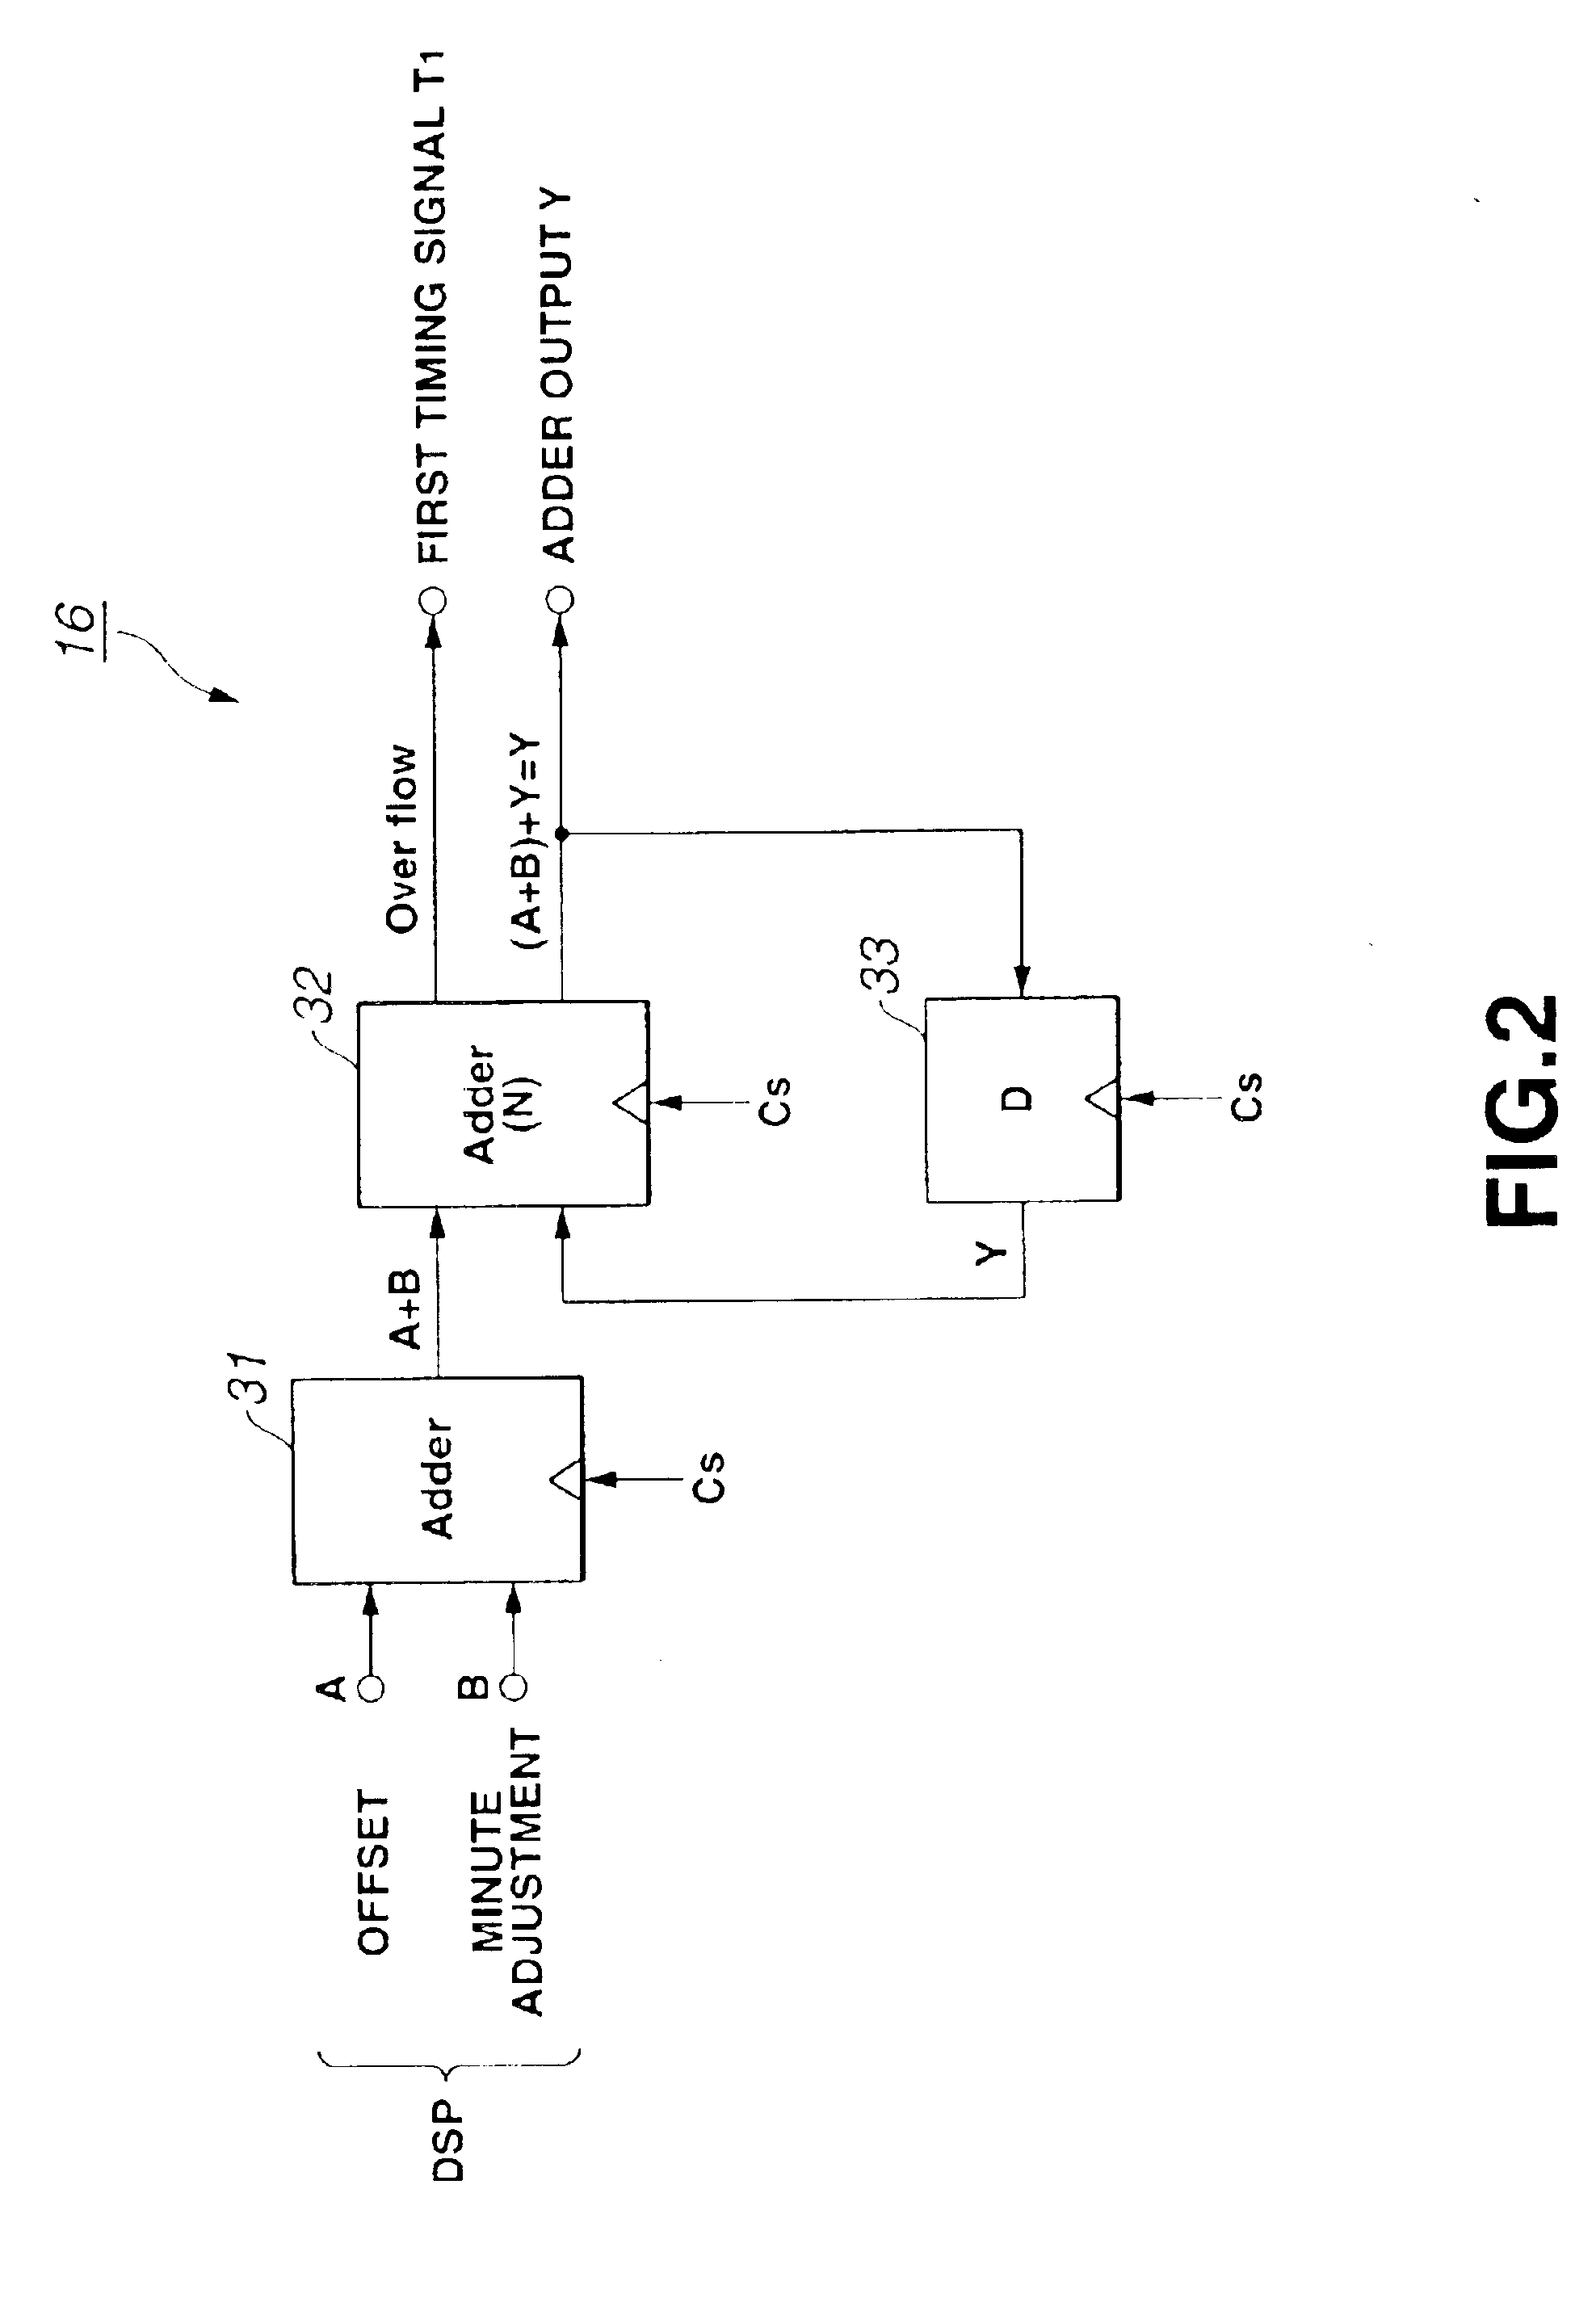 Video processing apparatus for converting composite video signals to digital component video signals